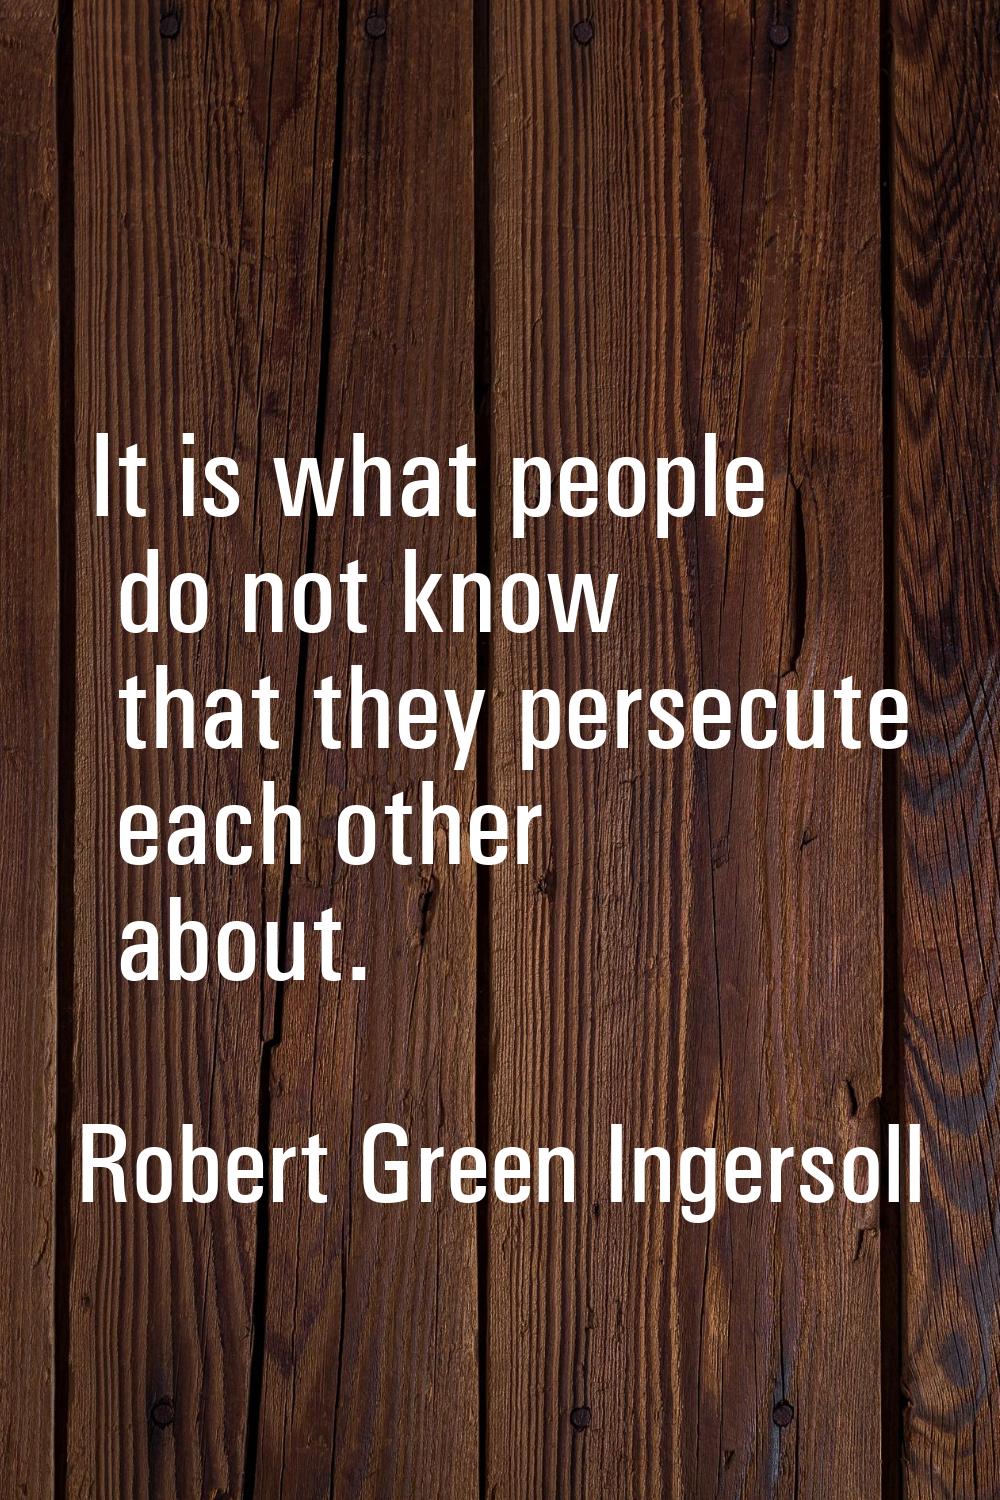 It is what people do not know that they persecute each other about.